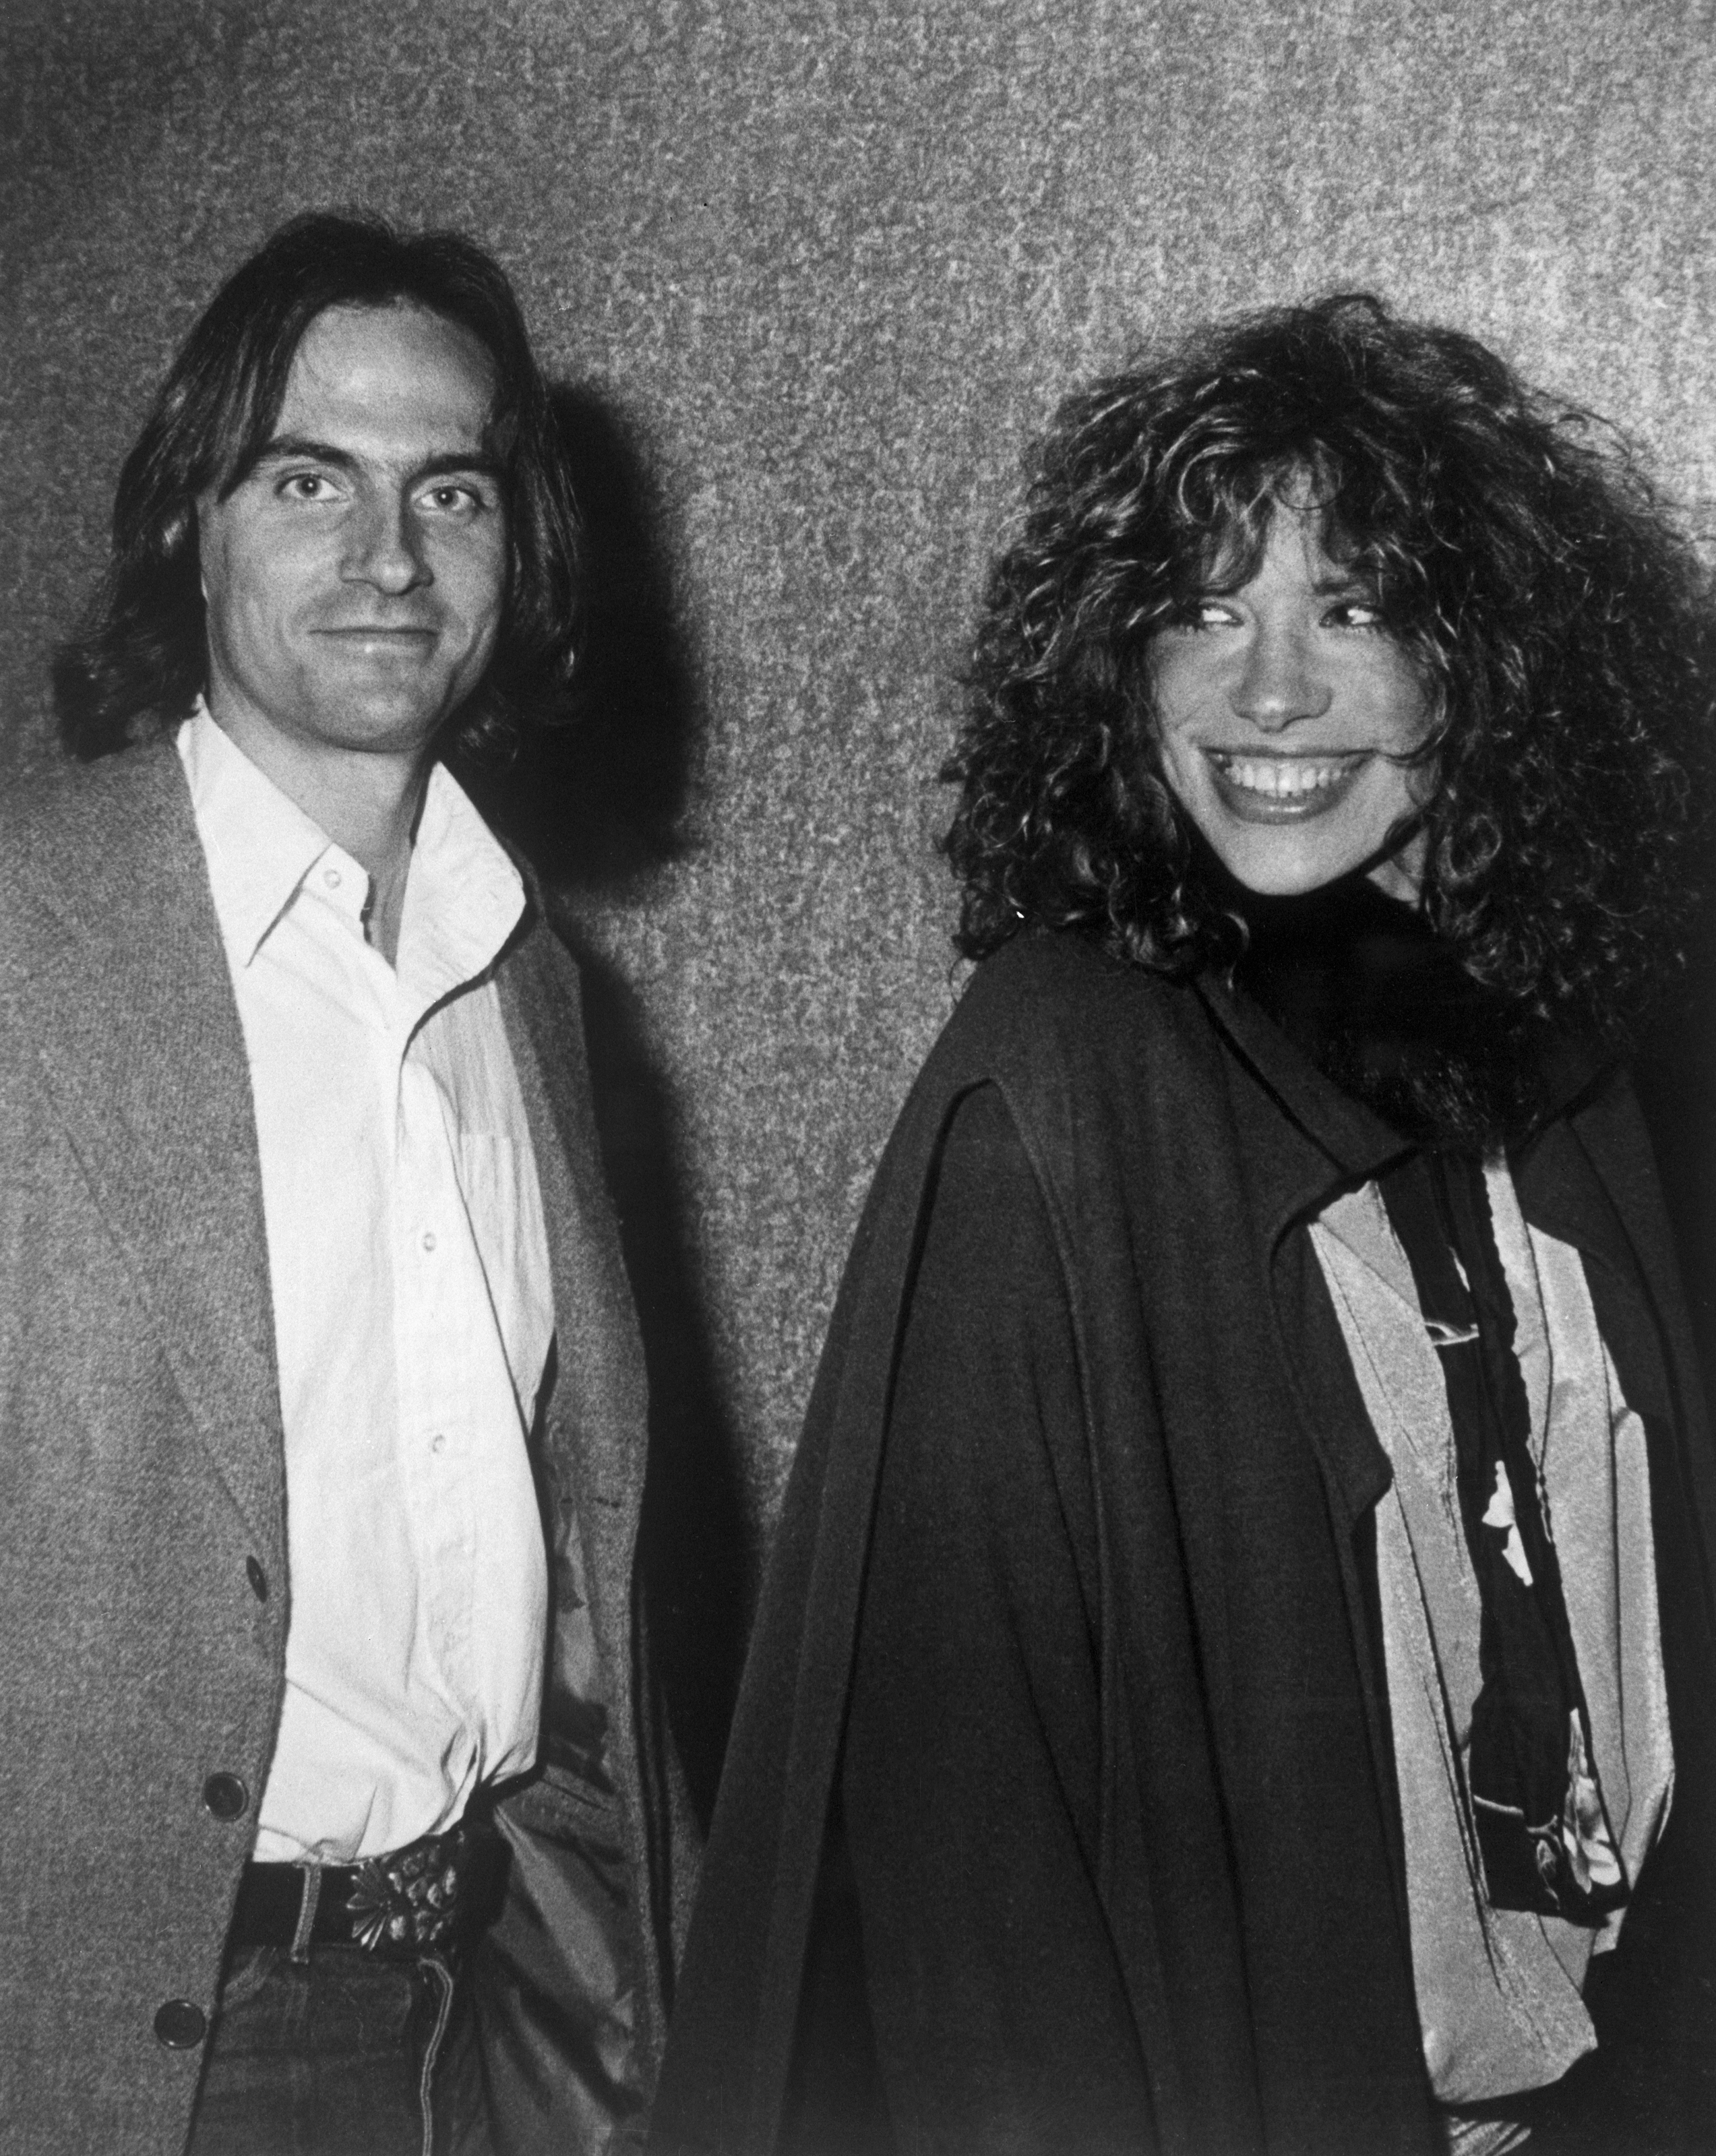 James Tayor and Carly Simon at the preview of the movie "The Last Waltz" on April 17, 1978 | Source: Getty Images